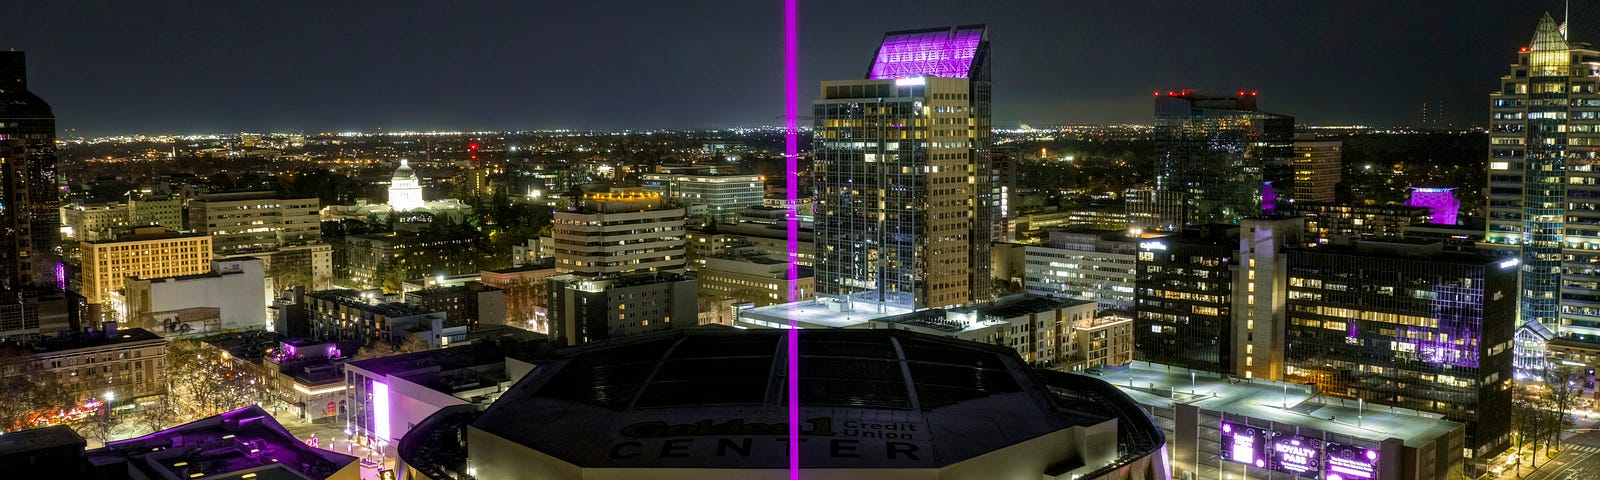 A bright purple beam shooting into the sky from the Sacramento Kings arena in Sacramento, California, surrounded by buildings